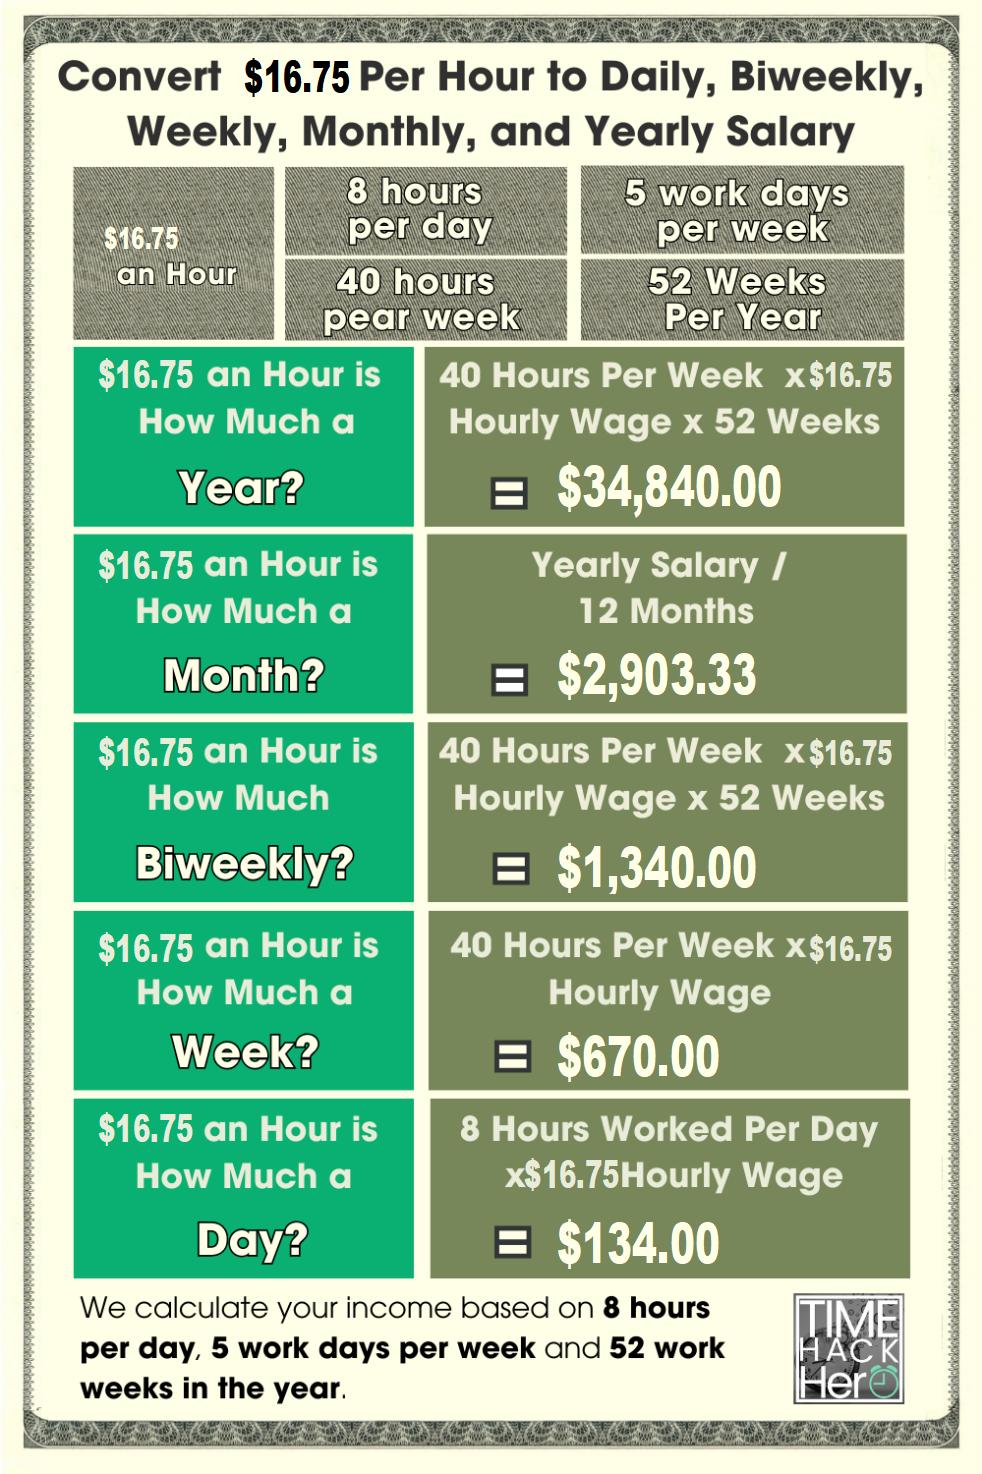 Convert $16.75 Per Hour to Weekly, Monthly, and Yearly Salary